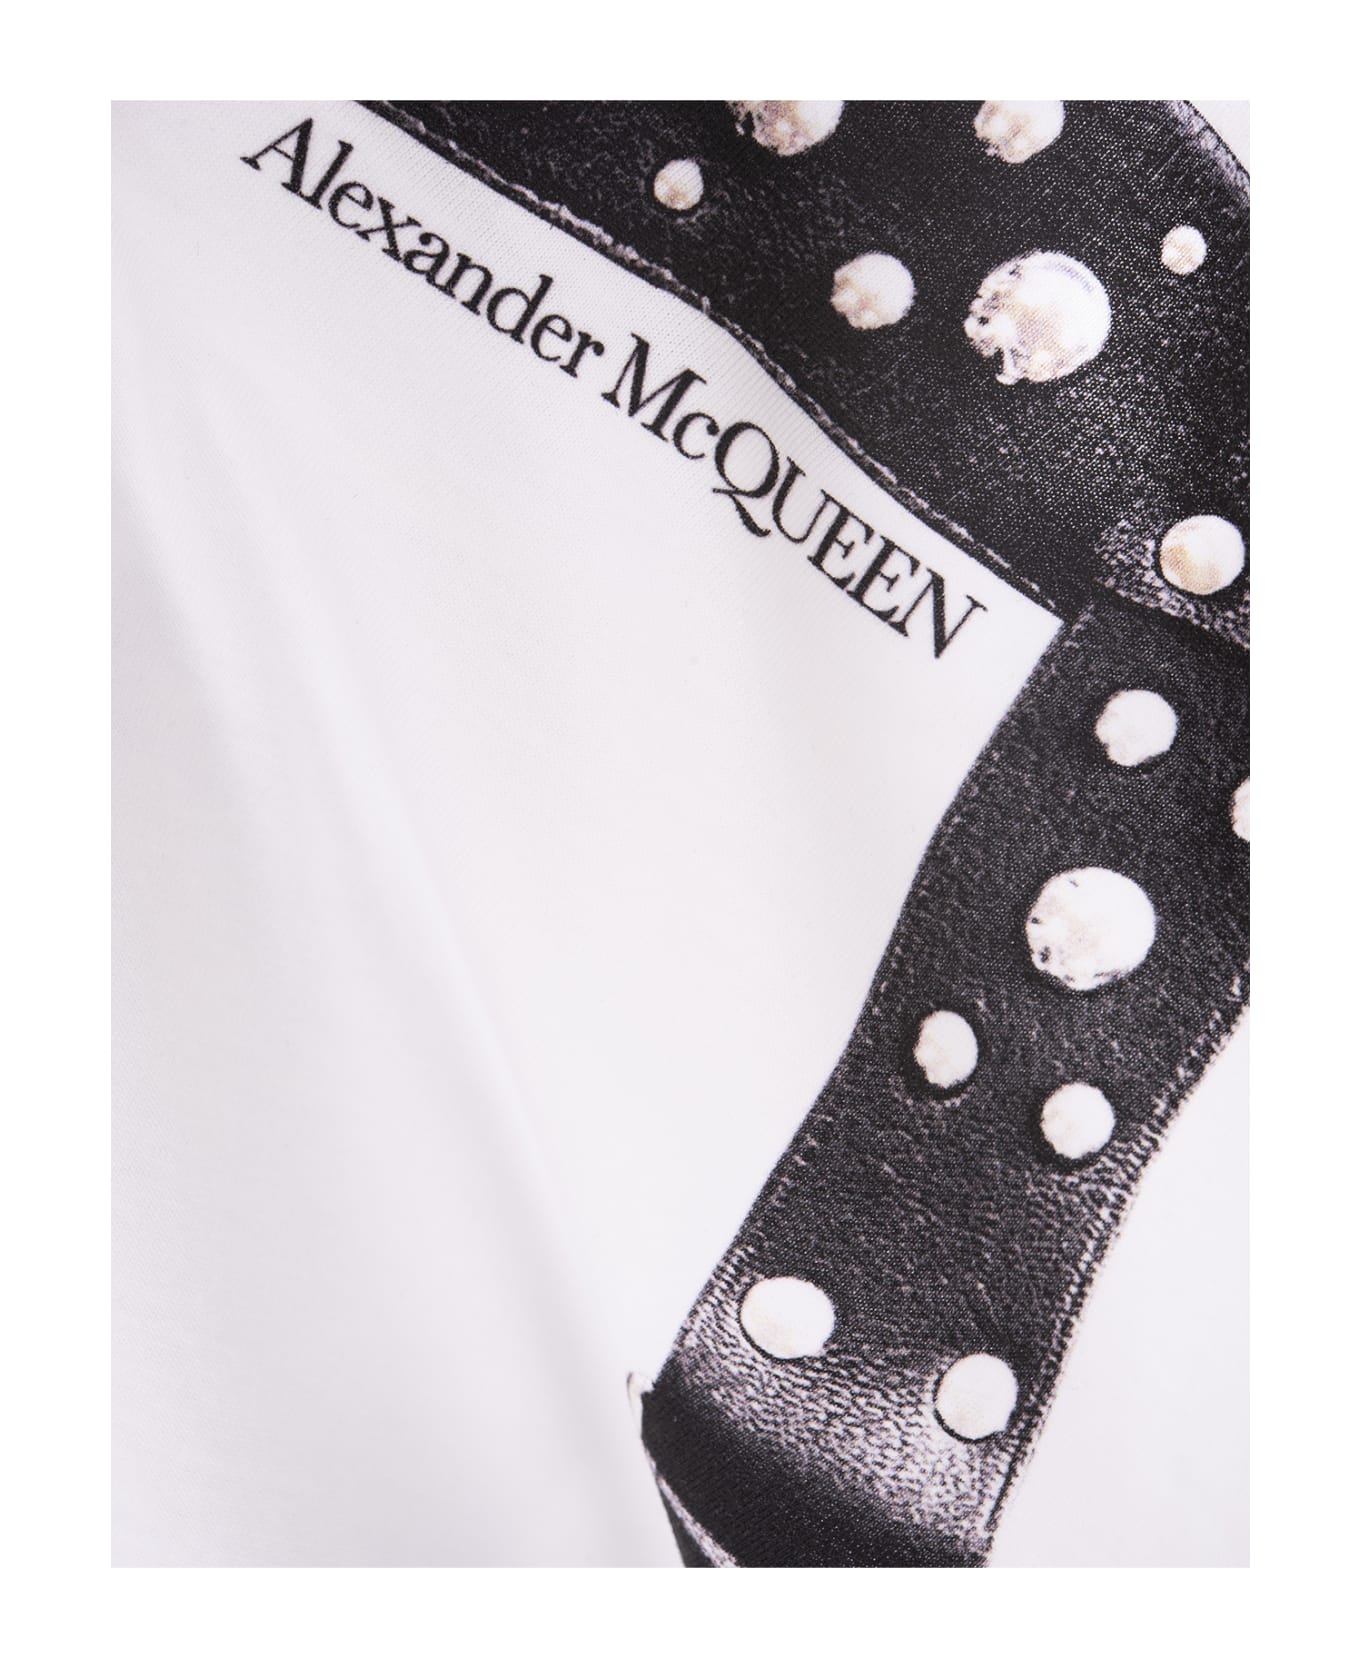 Alexander McQueen Black And White Studded Harness T-shirt - White